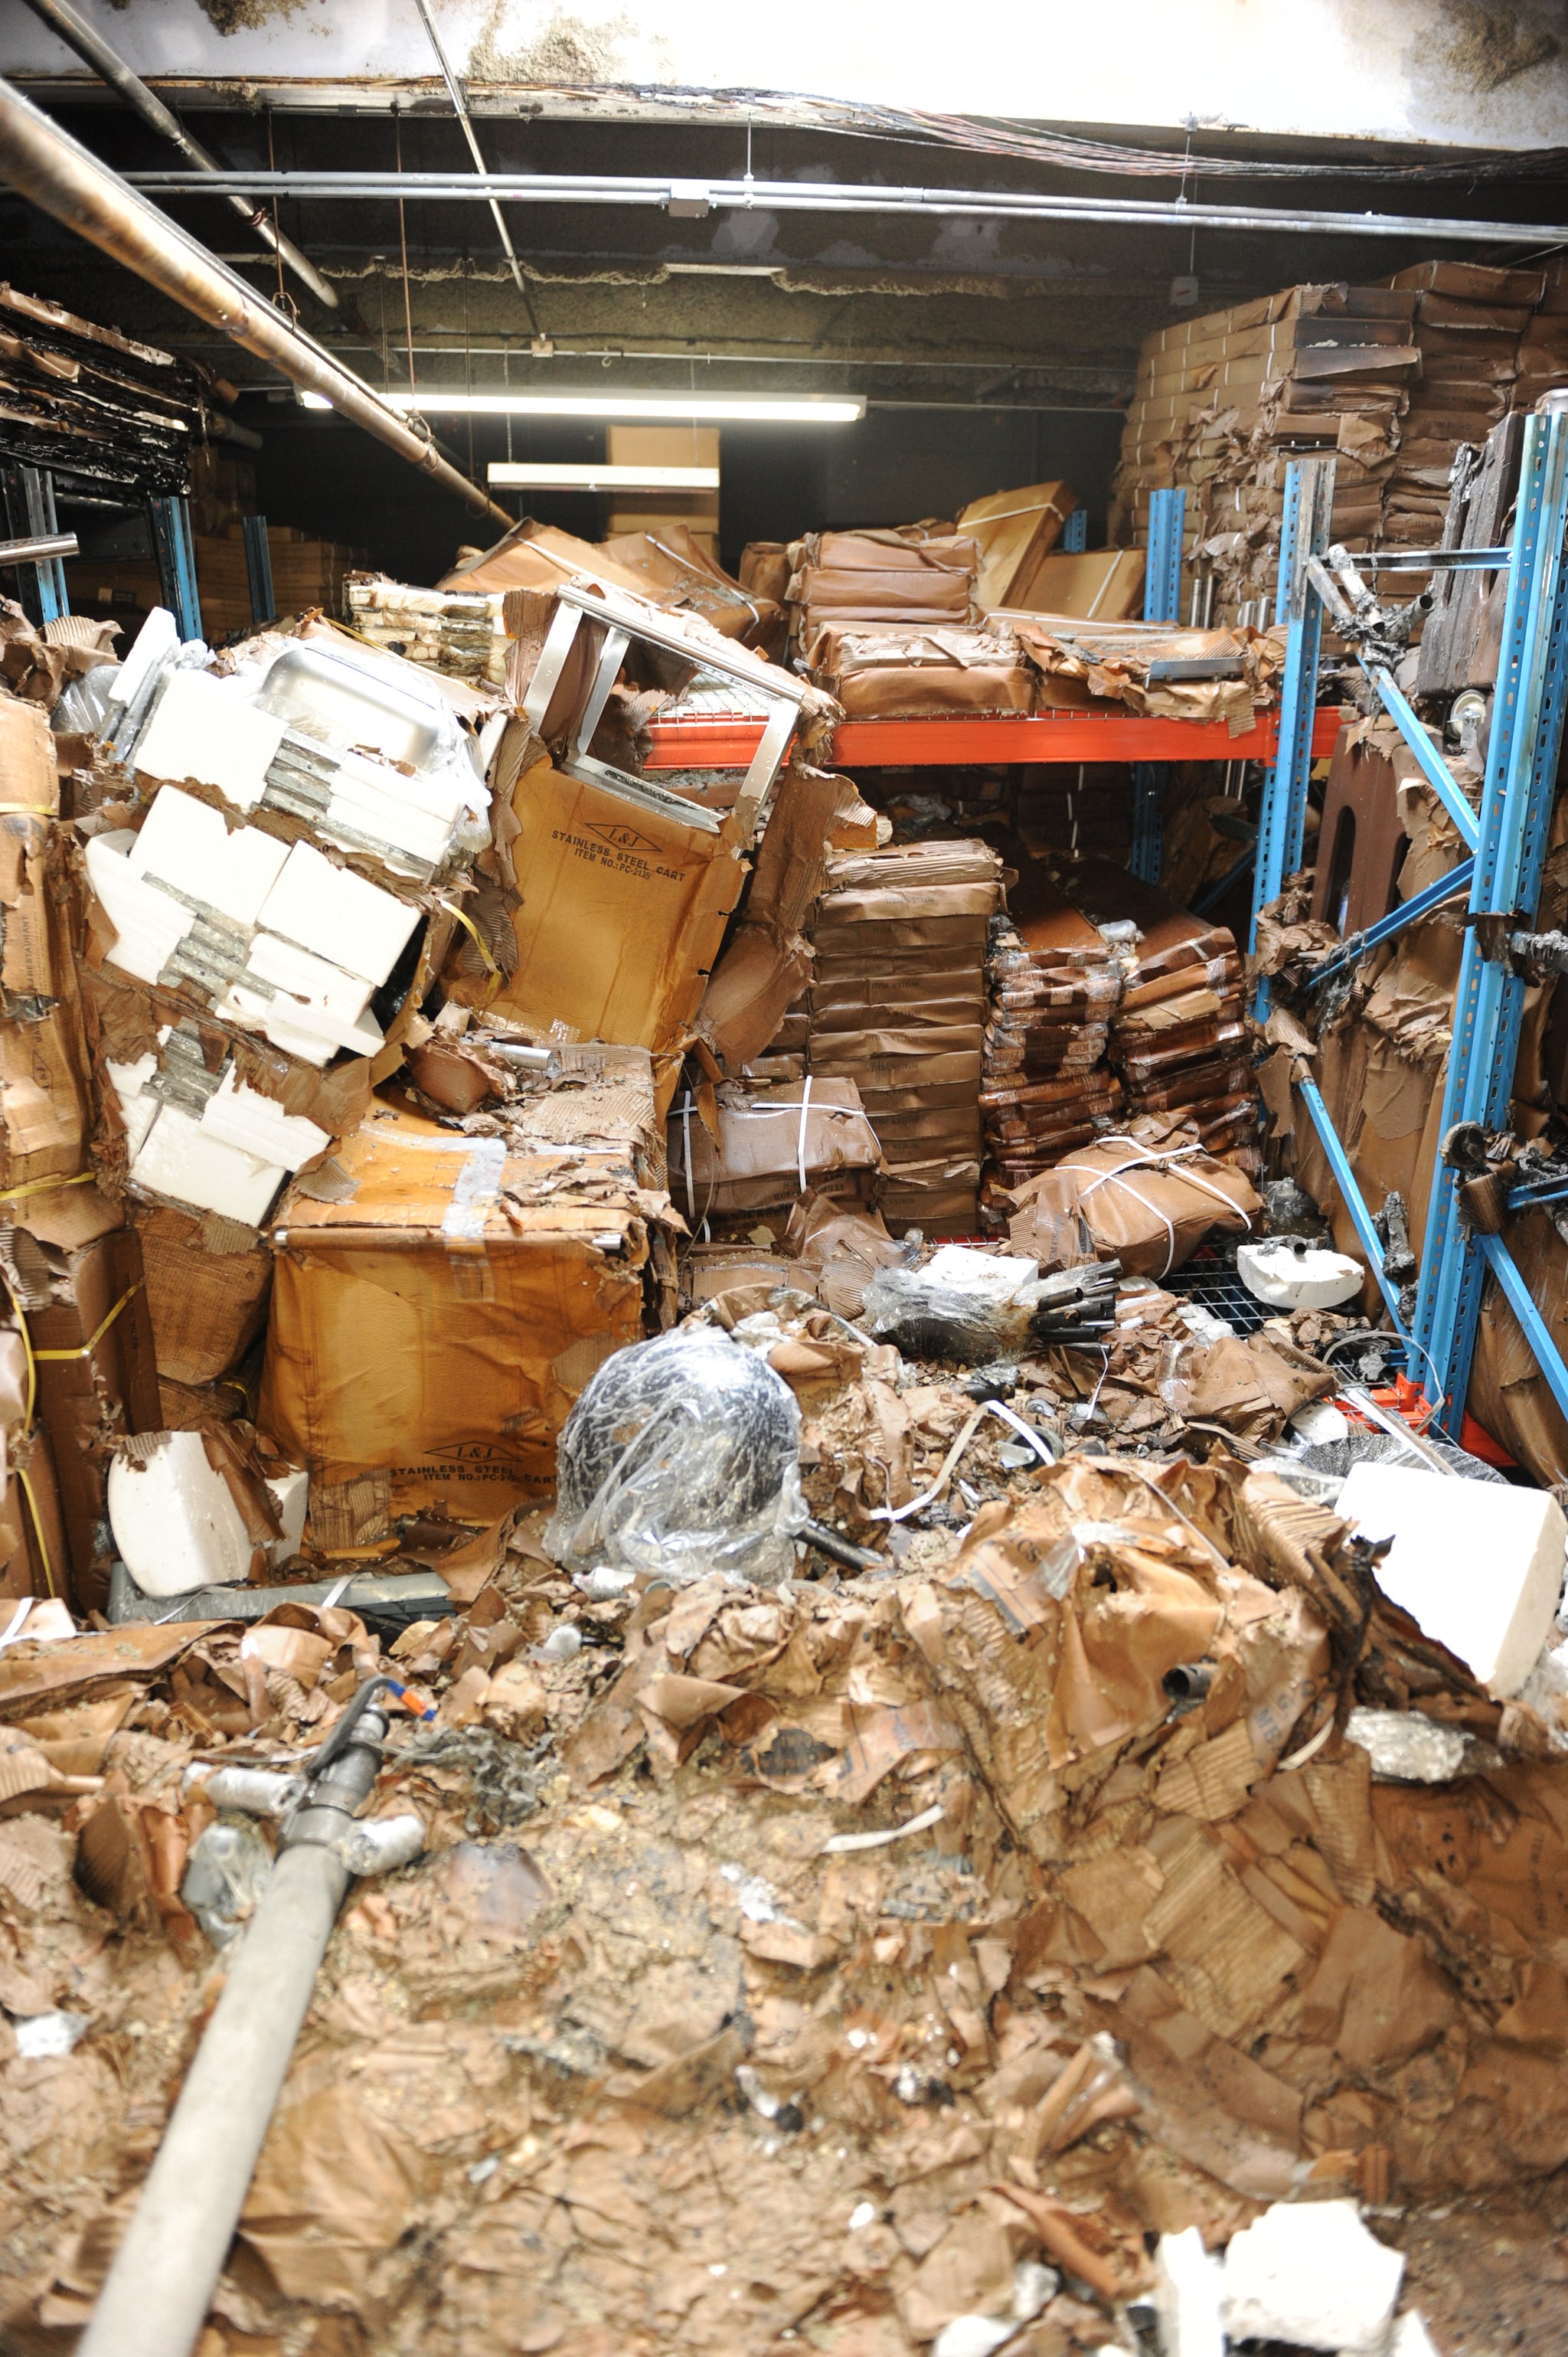 The fire area contains cardboard boxes damage by the fire and water used to suppress the fire.  Many of the cardboard boxes have fallen off the storage racks and broken open revealing plastic shelving and restaurant equipment.